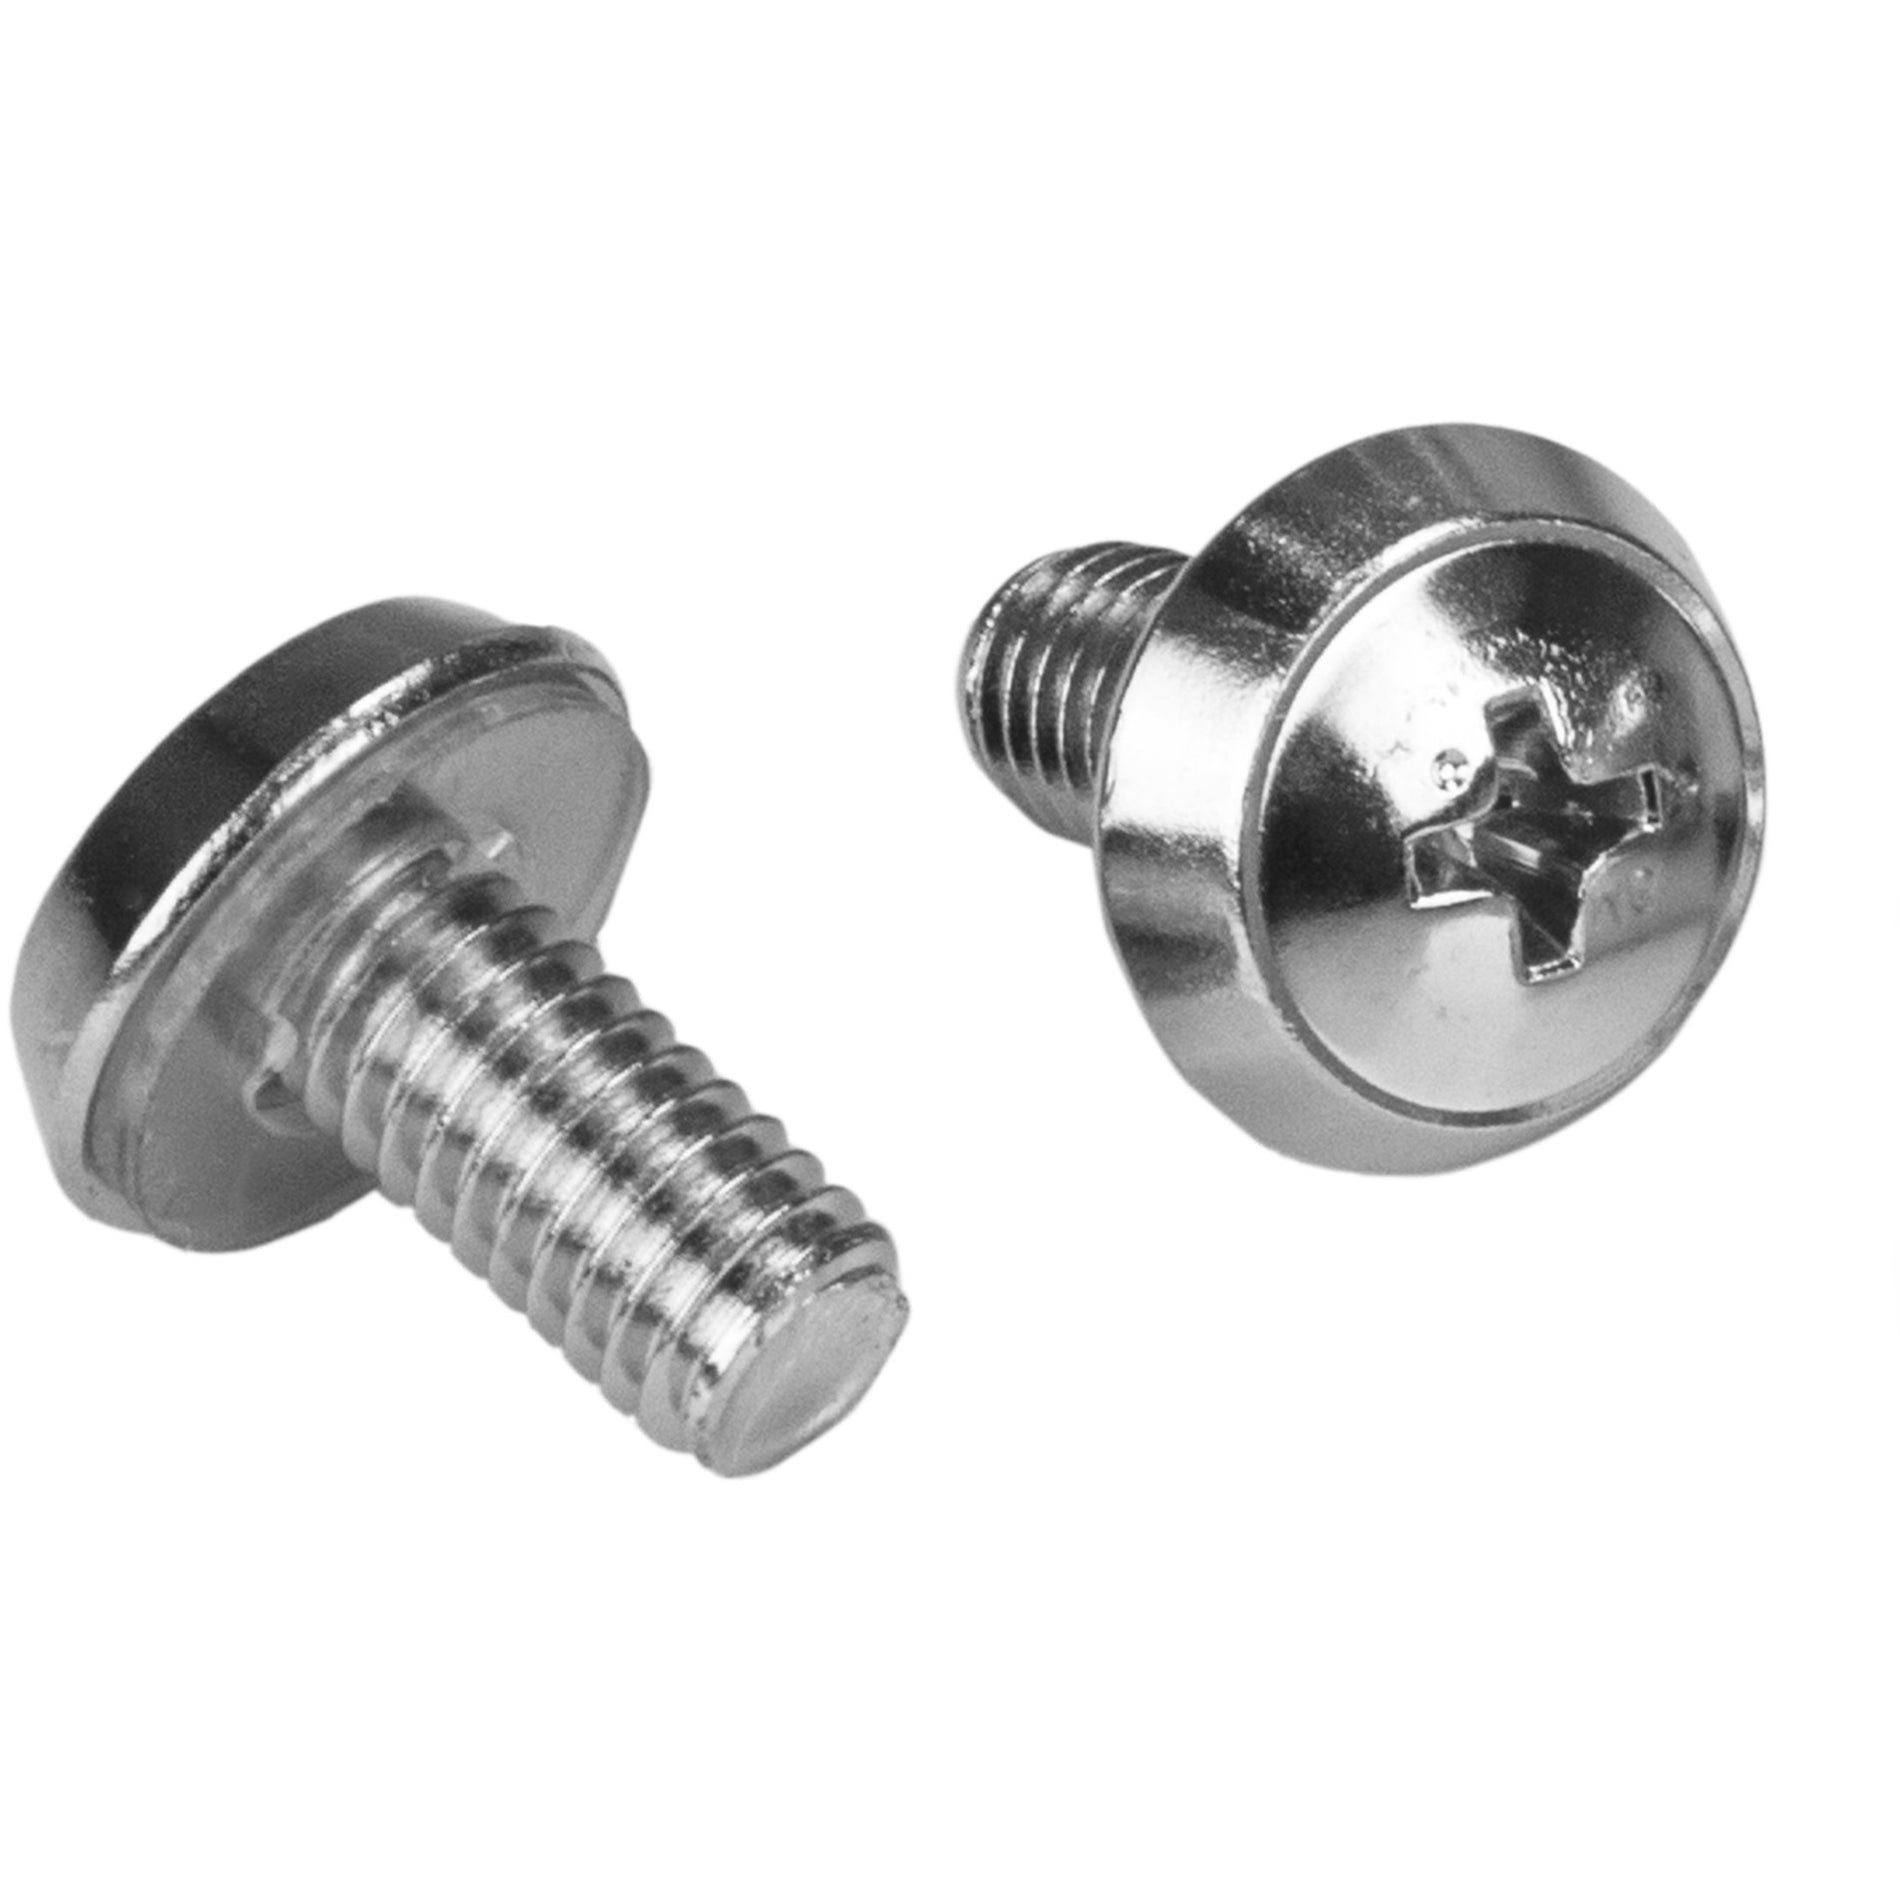 StarTech.com CABSCREWM62 100 Pkg M6 Mounting Screws and Cage Nuts for Server Rack Cabinet, Nickel Plated, Rust Resistant